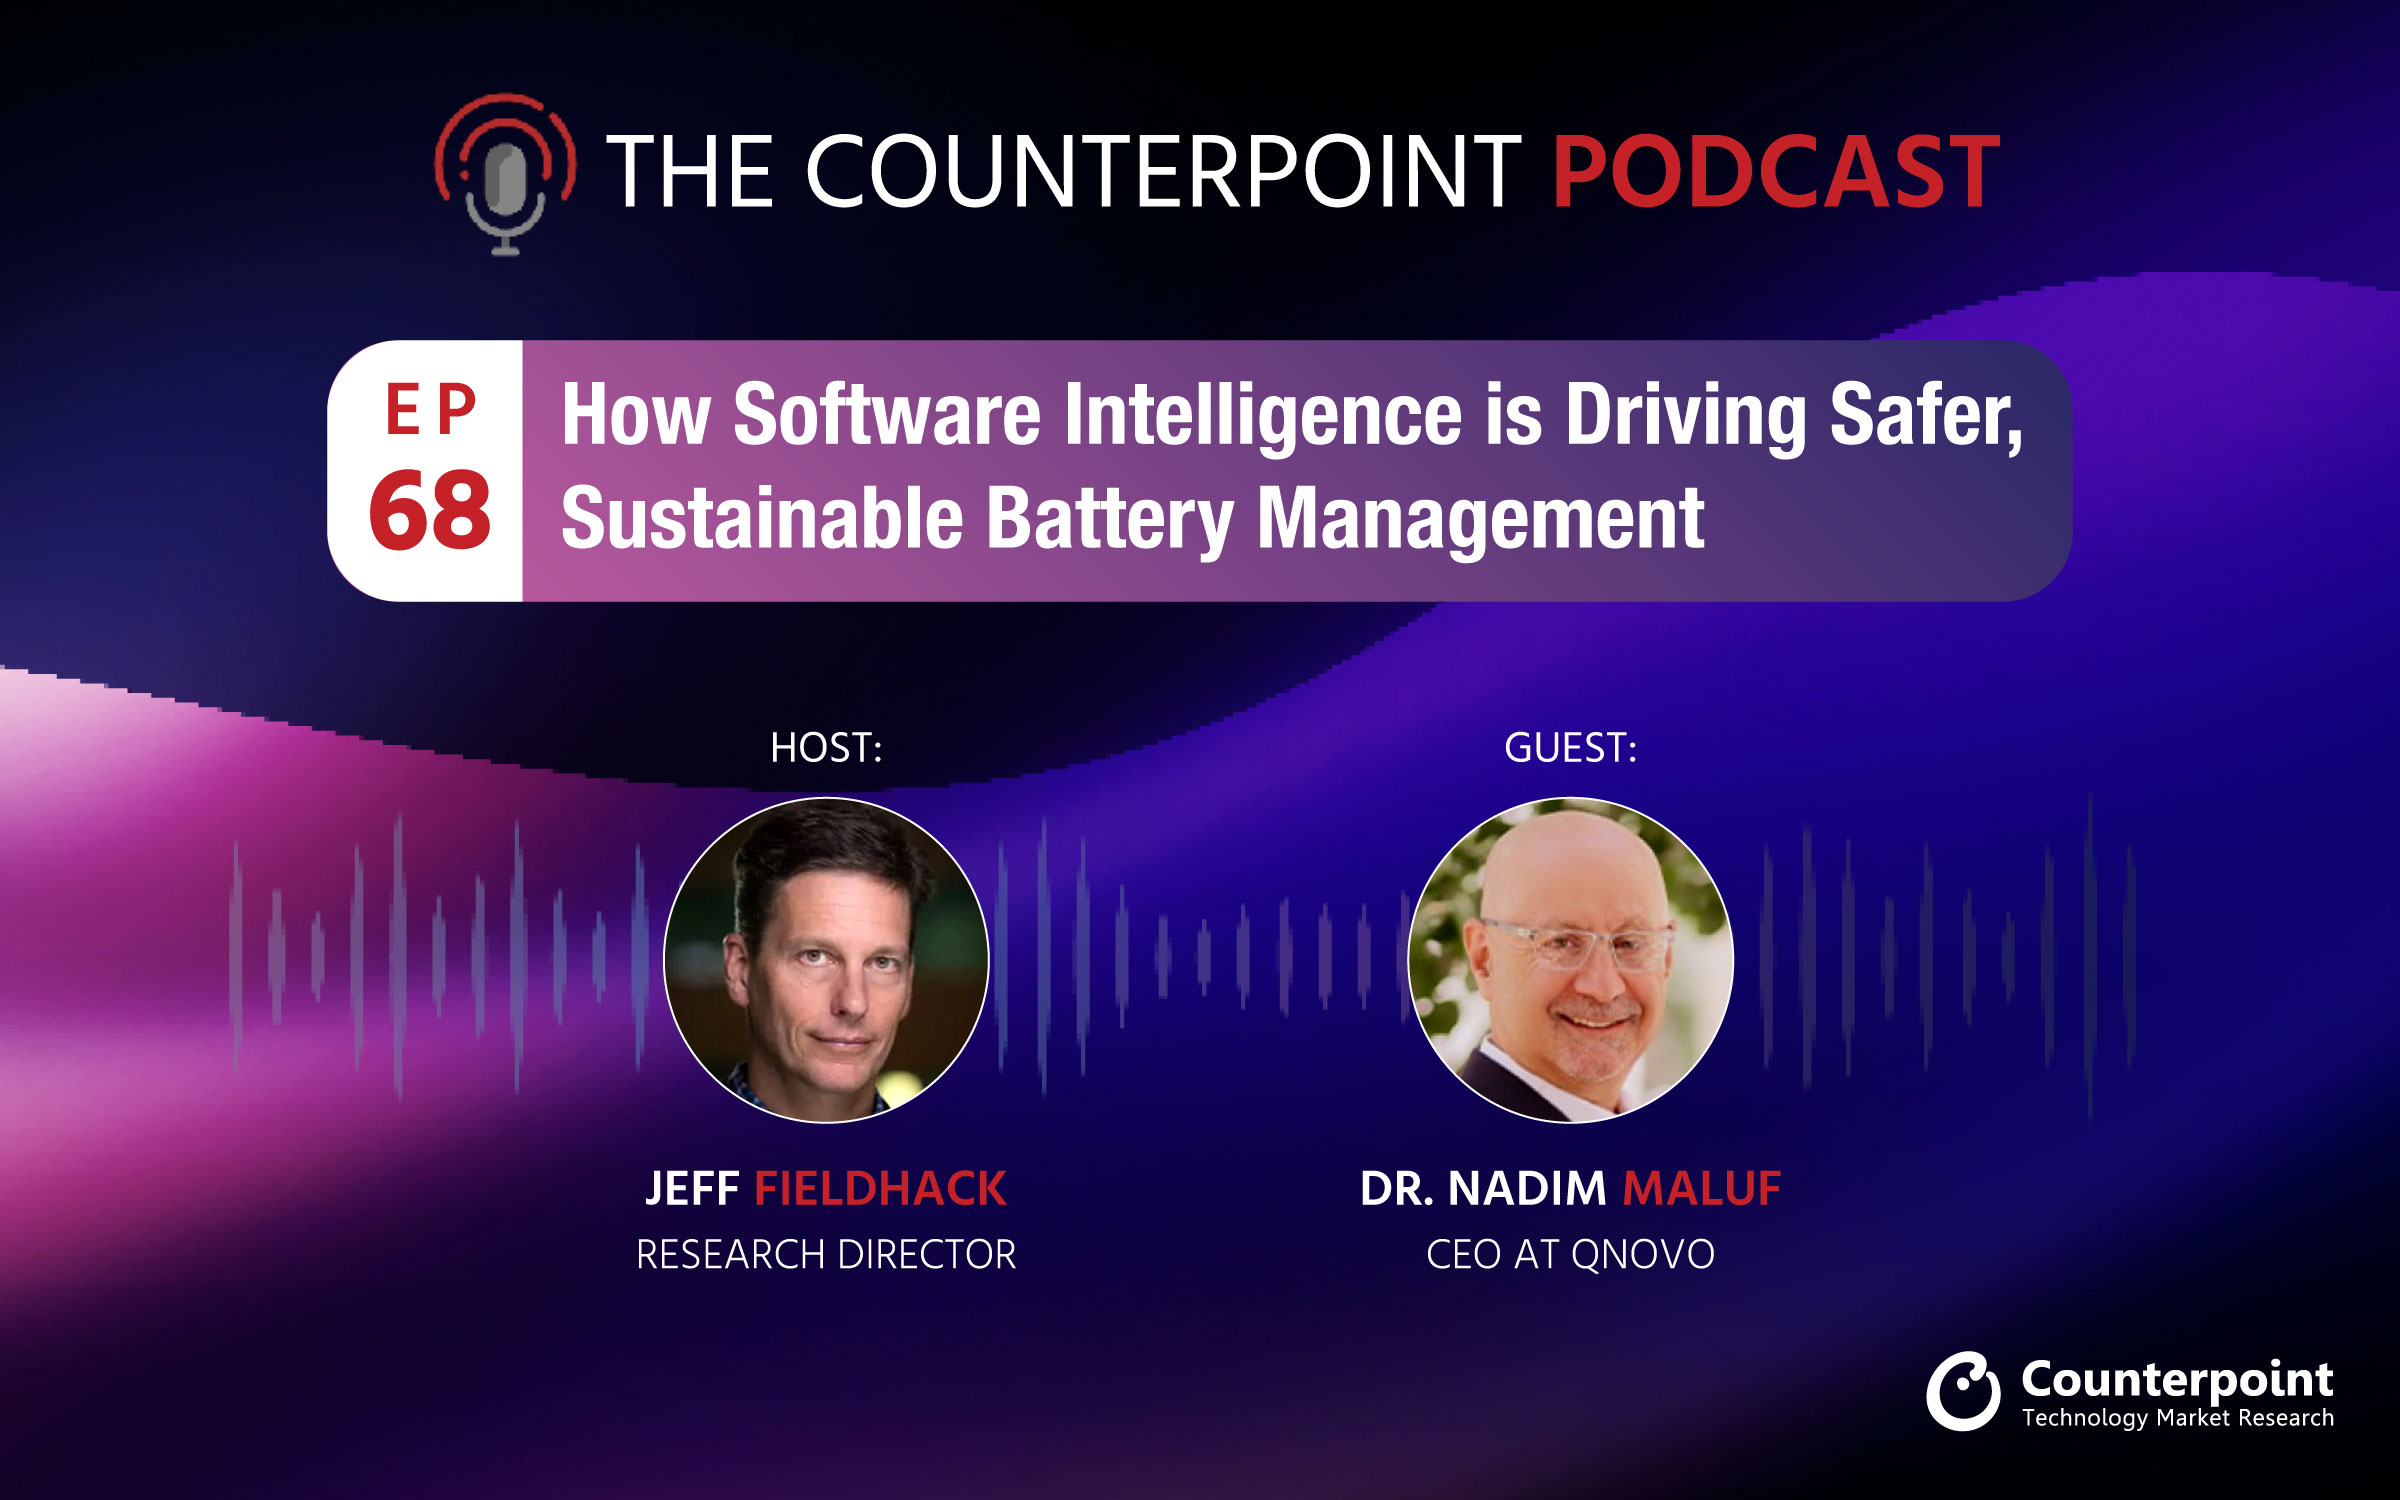 Podcast #68: How Software Intelligence is Driving Safer, Sustainable Battery Management